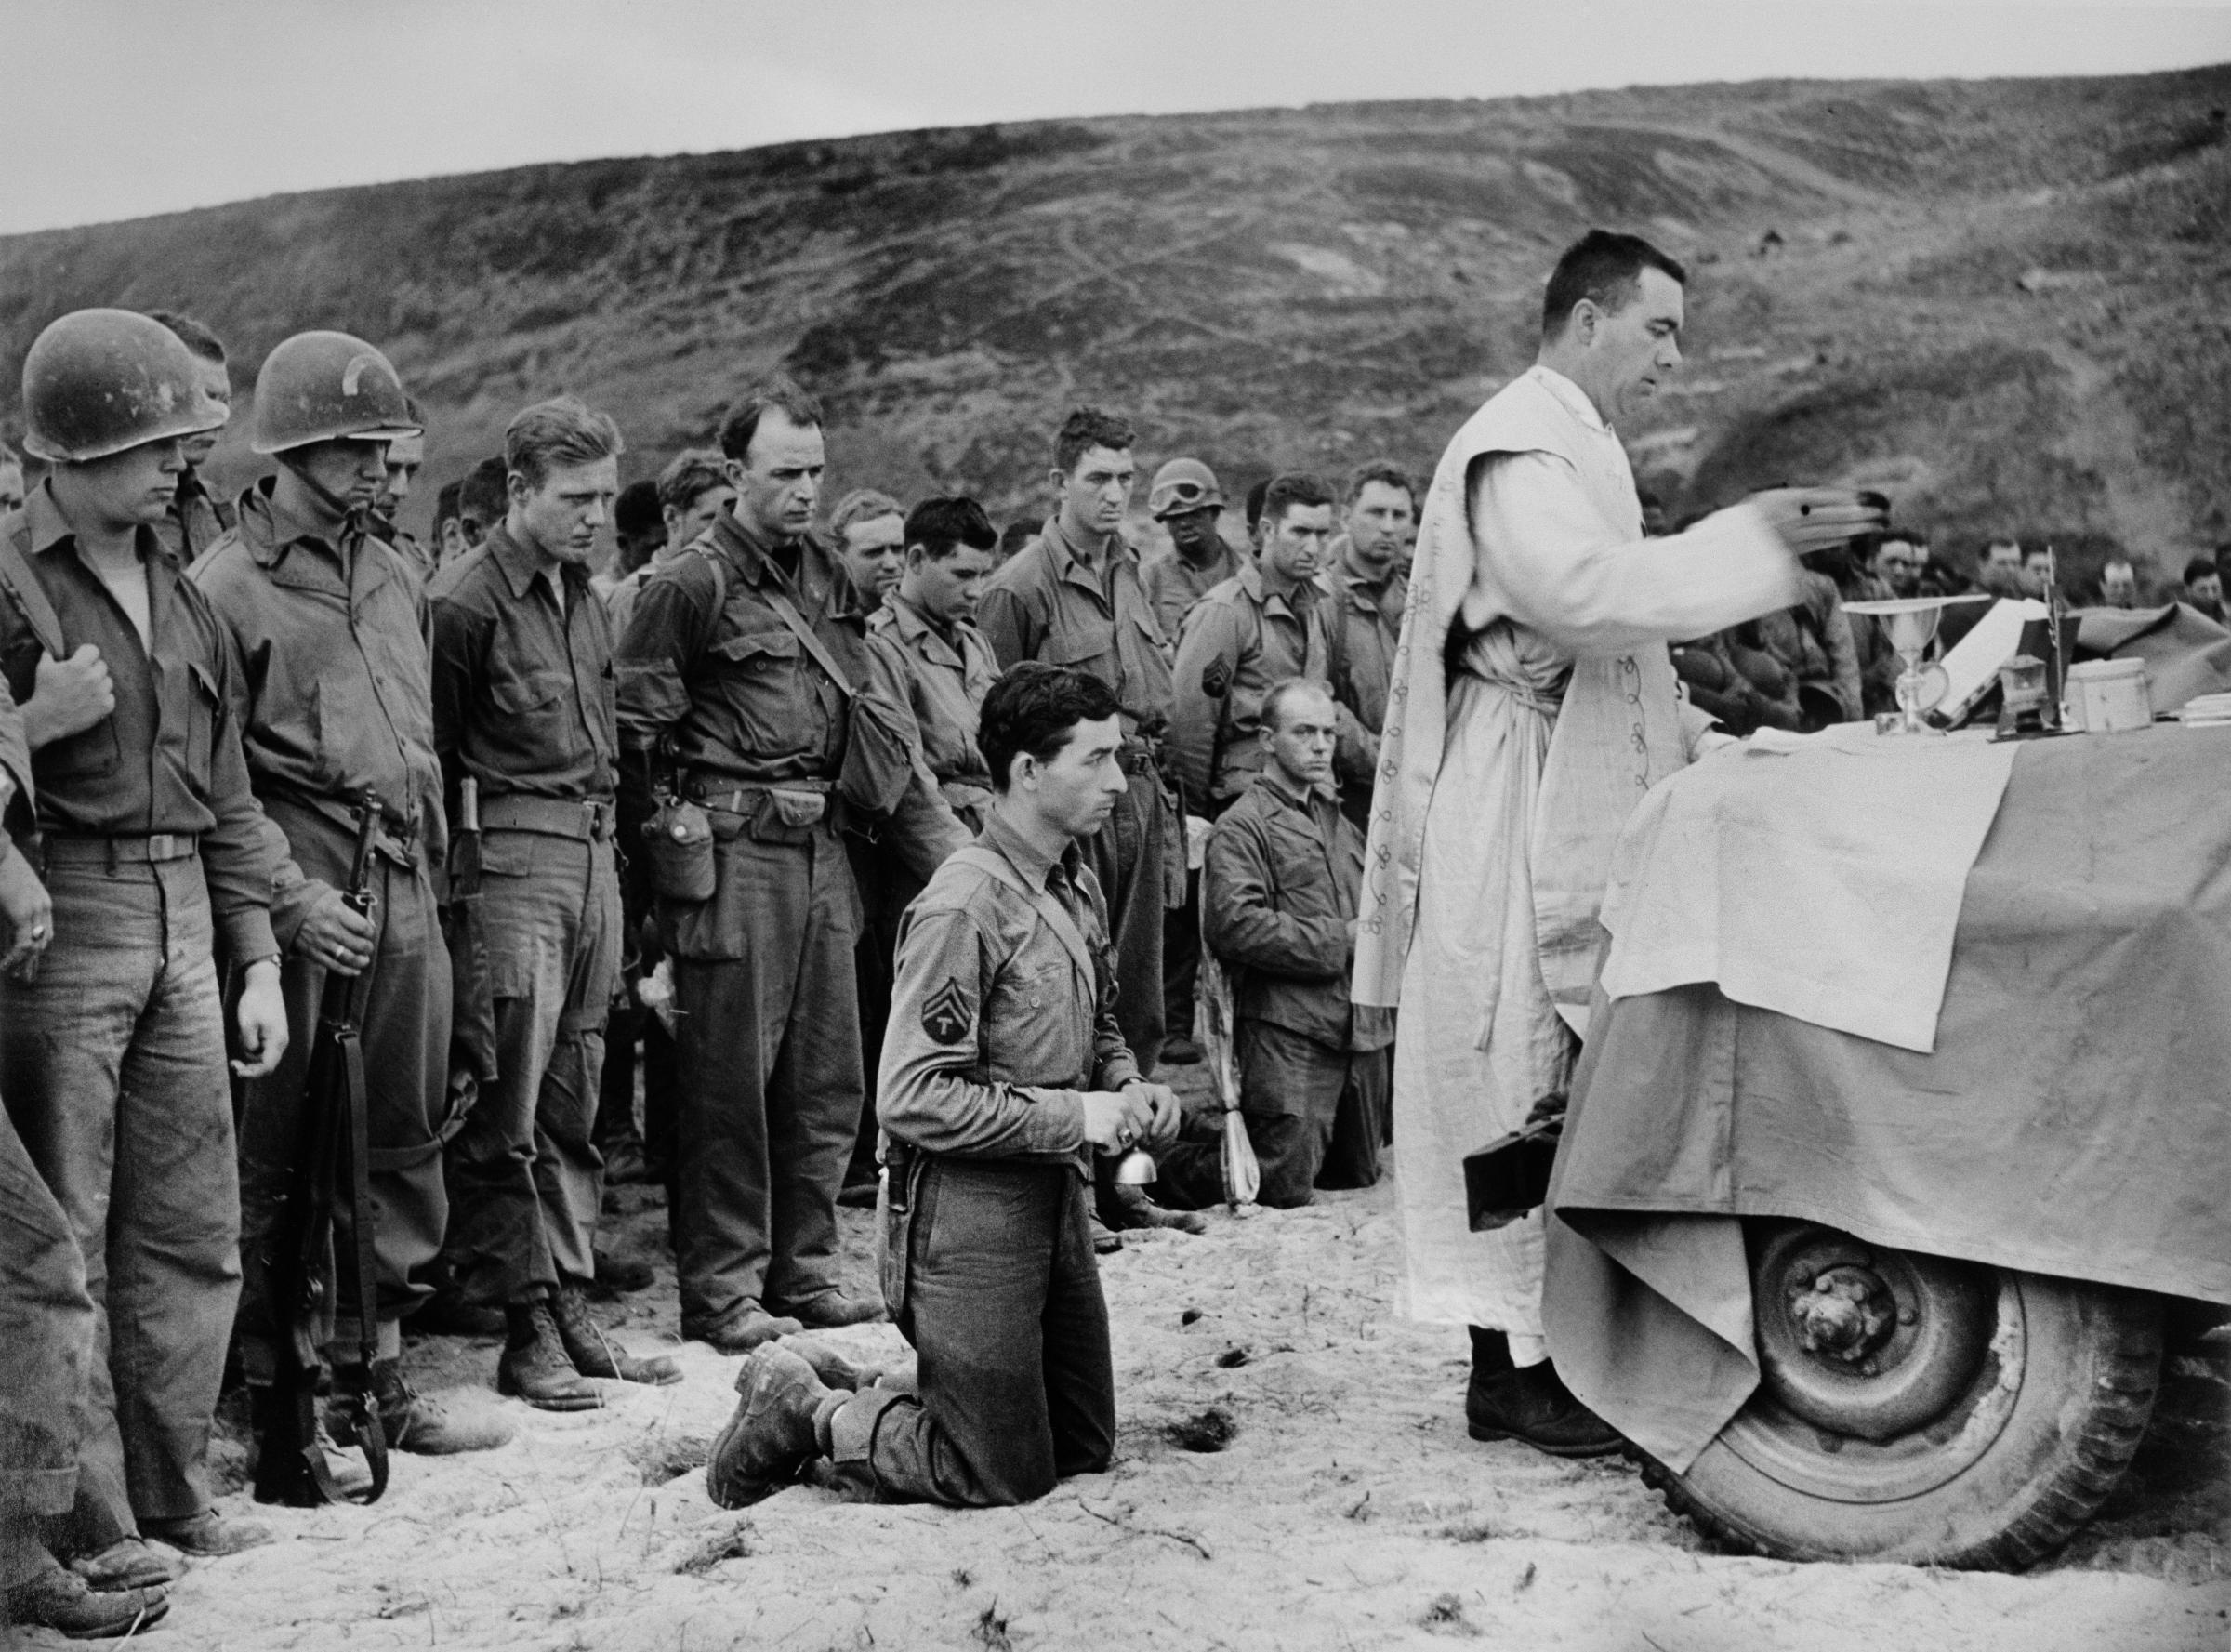 FRANCE. Normandy. June, 1944. A Catholic Priest conducts mass on Omaha Beach.